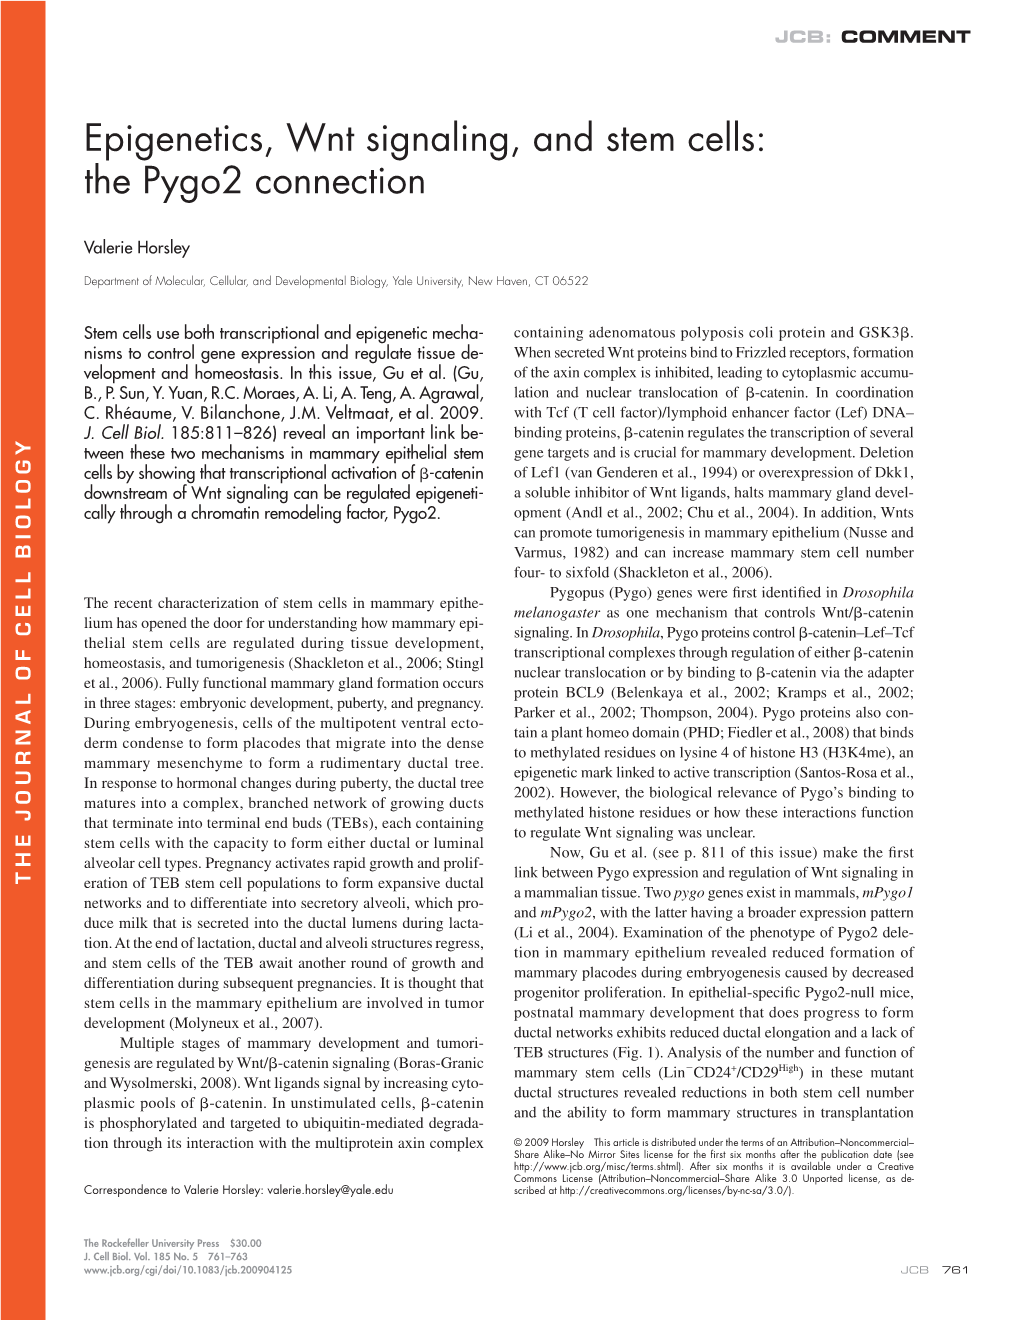 Epigenetics, Wnt Signaling, and Stem Cells: the Pygo2 Connection